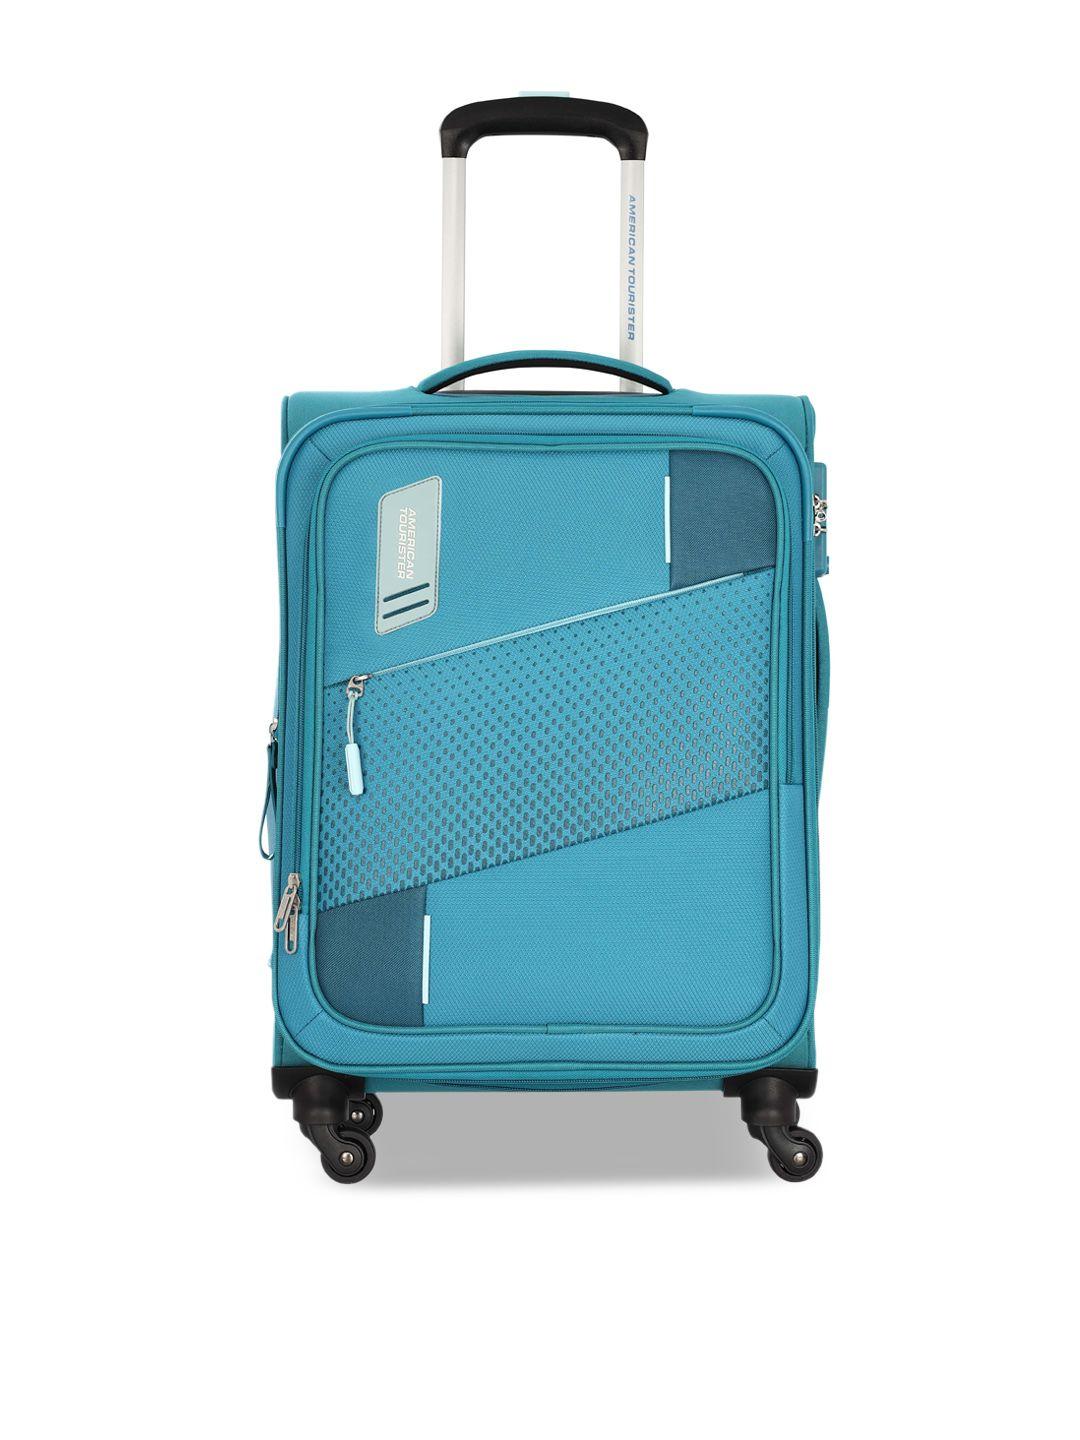 american tourister textured water resistant soft-sided cabin trolley suitcase